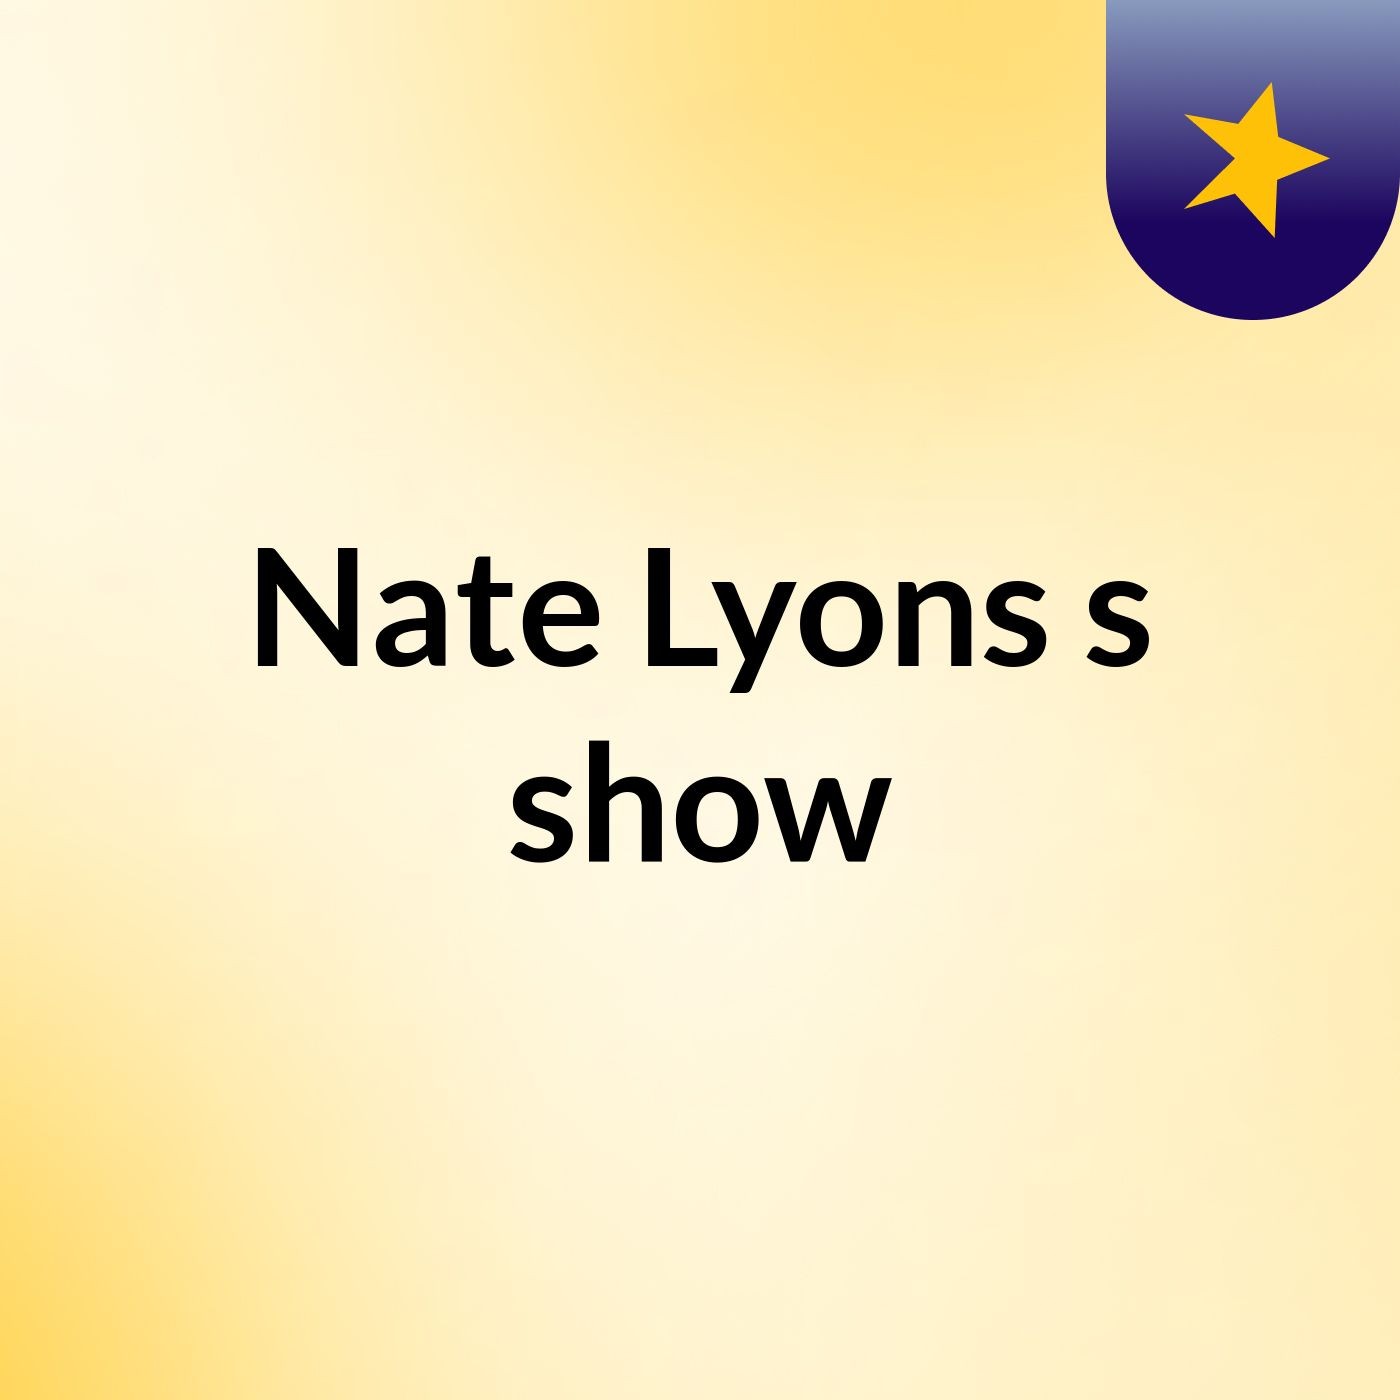 Nate Lyons's show